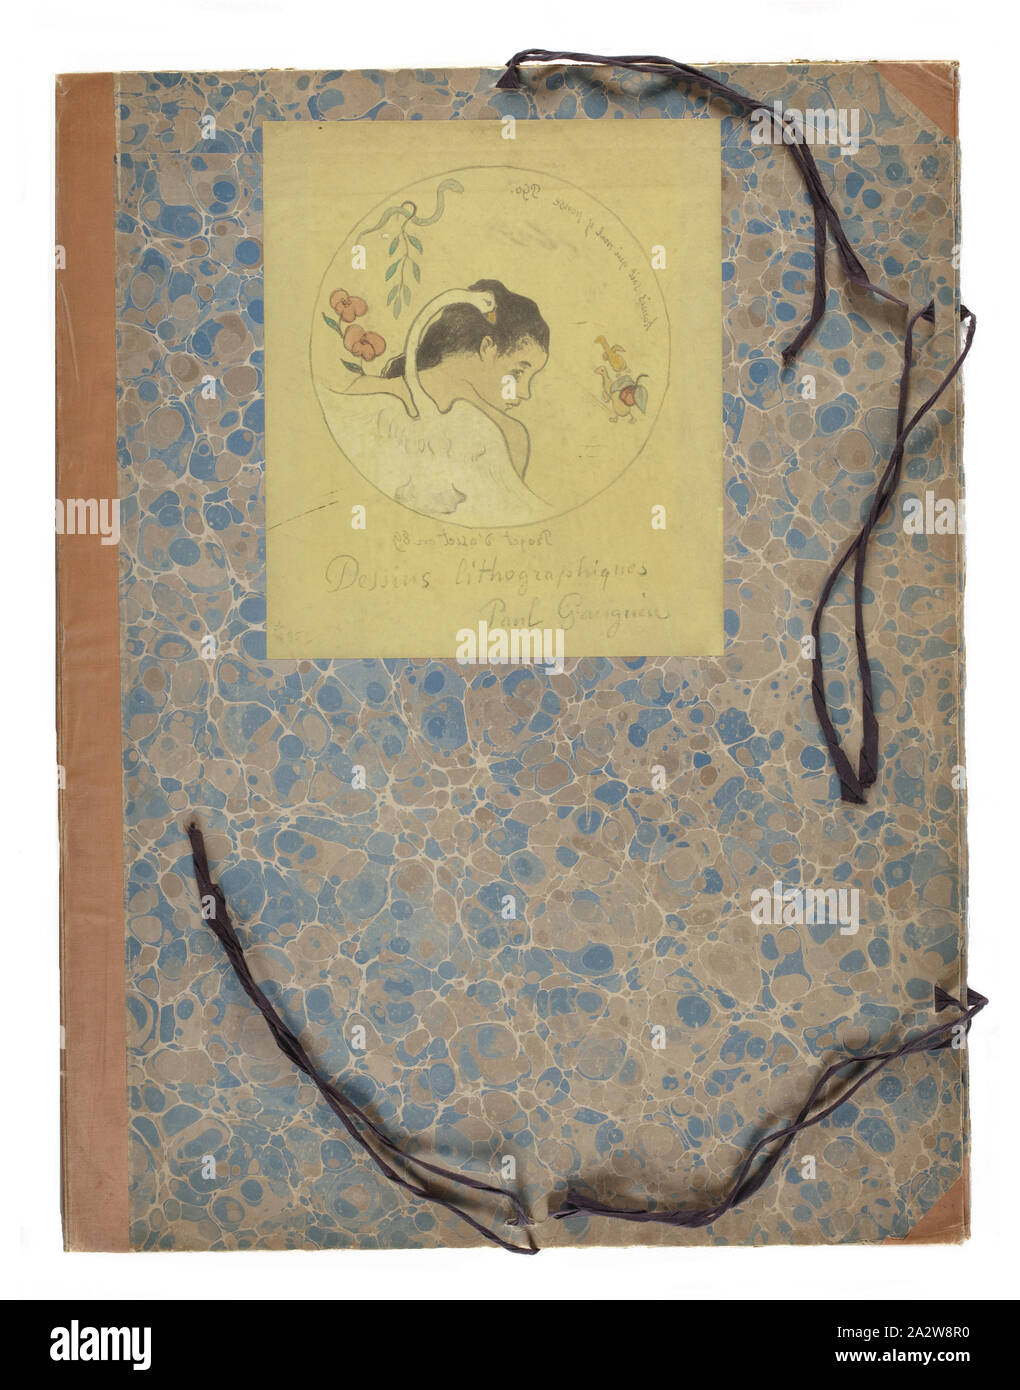 Design for a Plate - Leda, Paul Gauguin (French, 1848-1903), Edward Ancourt, Printer (French), 1889, Zincograph with watercolor and gouache on canary yellow wove paper, mounted on cardboard folder, 26-3/8 x 20 x 1/2 in. (portfolio) 11-15/16 x 10-3/16 in. (image), Inscribed and signed in black ink below image: Dessins lithographiques/Paul Gauguin, Inscribed and signed on the plate, in reverse, UR: homis [sic] soit qui mal y pense PGo., Inscribed and dated on the plate outside the circle, in reverse, LC: Projet d'asiet [sic] en 89, series, Dessins lithographiques (The Volpini Suite Stock Photo